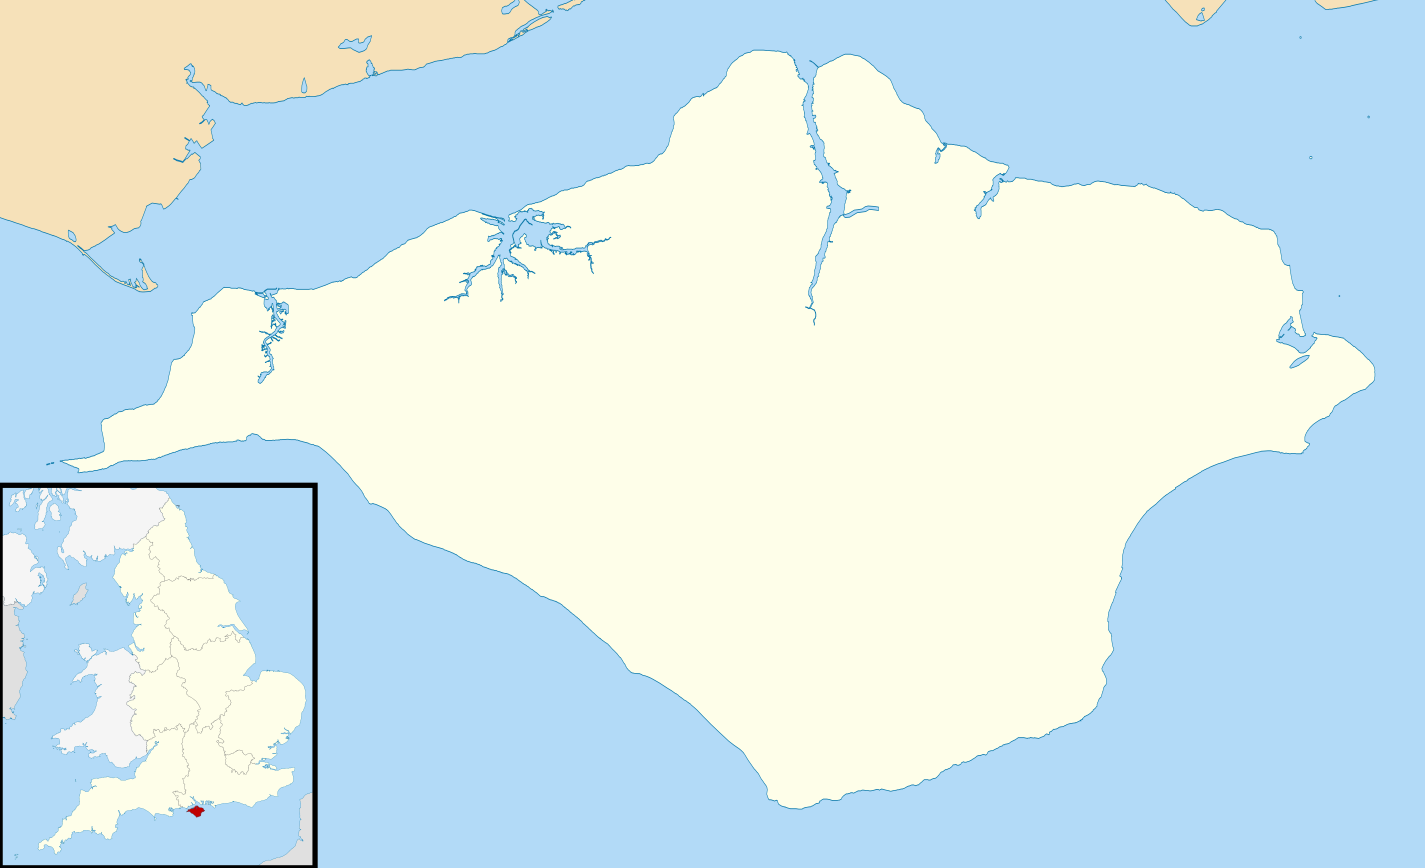 File:Isle of Wight UK district map (blank).svg